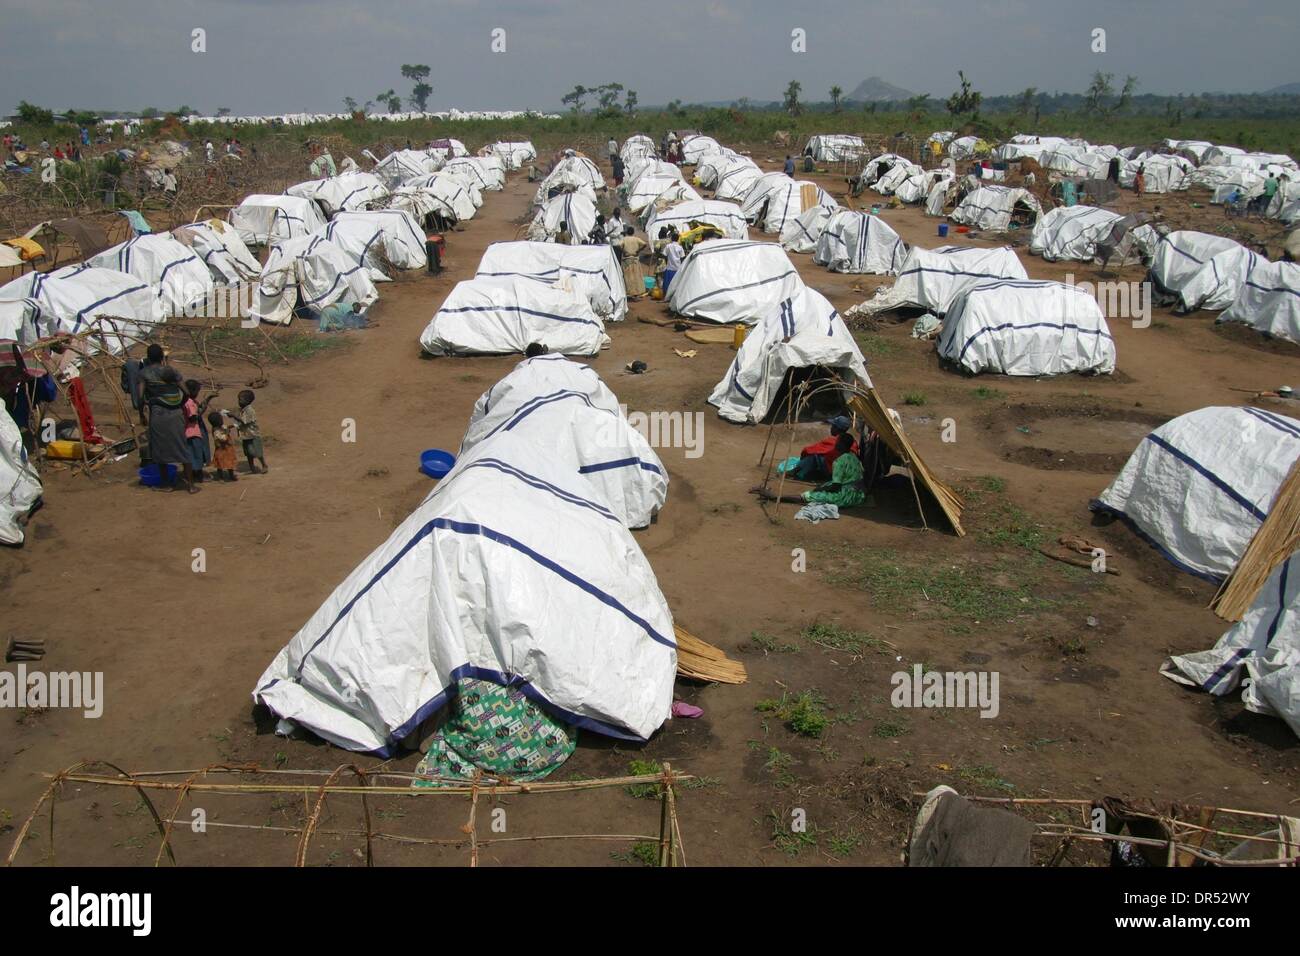 Tents in a refugee amp of Lira, Uganda, Africa during the civil war. The fighting in Uganda between the rebel force ( Lord Resistance Army or LRA and the Ugandan army (UPDF) has resulted in 100 thousands of displaced people in the north of Uganda. Stock Photo